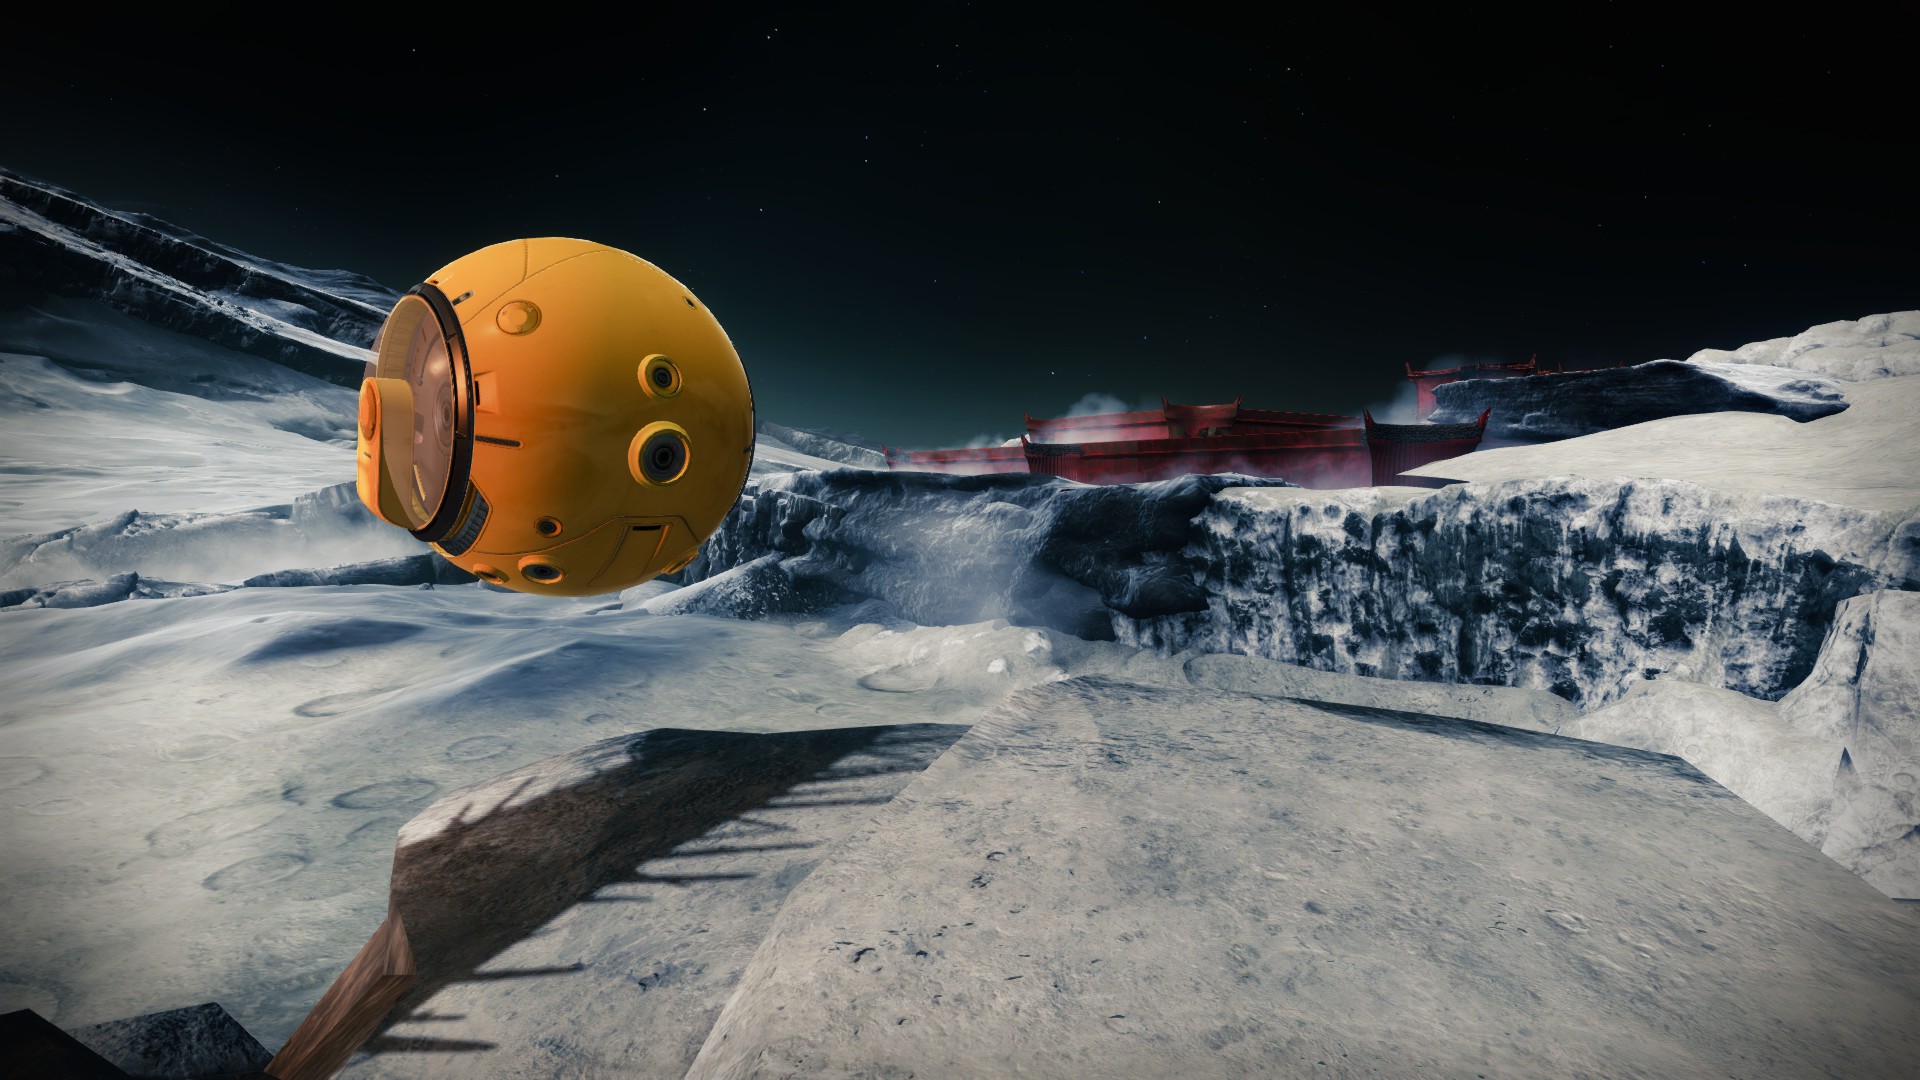 Where to find Destiny 2 Yellow Drone Locations